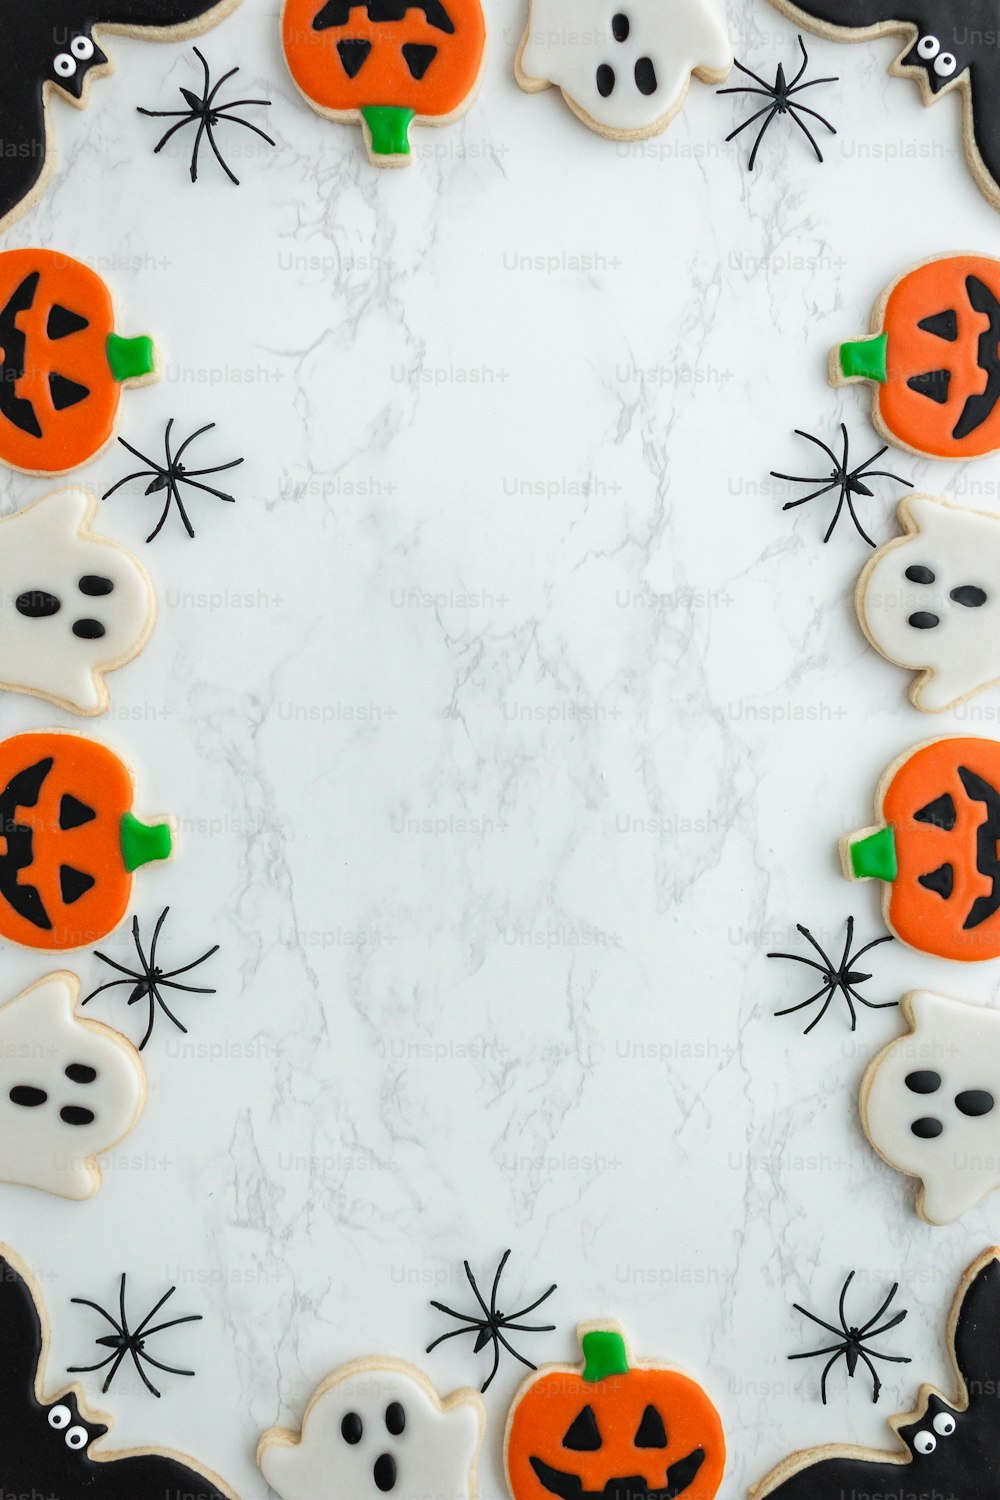 decorated cookies arranged in the shape of ghost and pumpkins